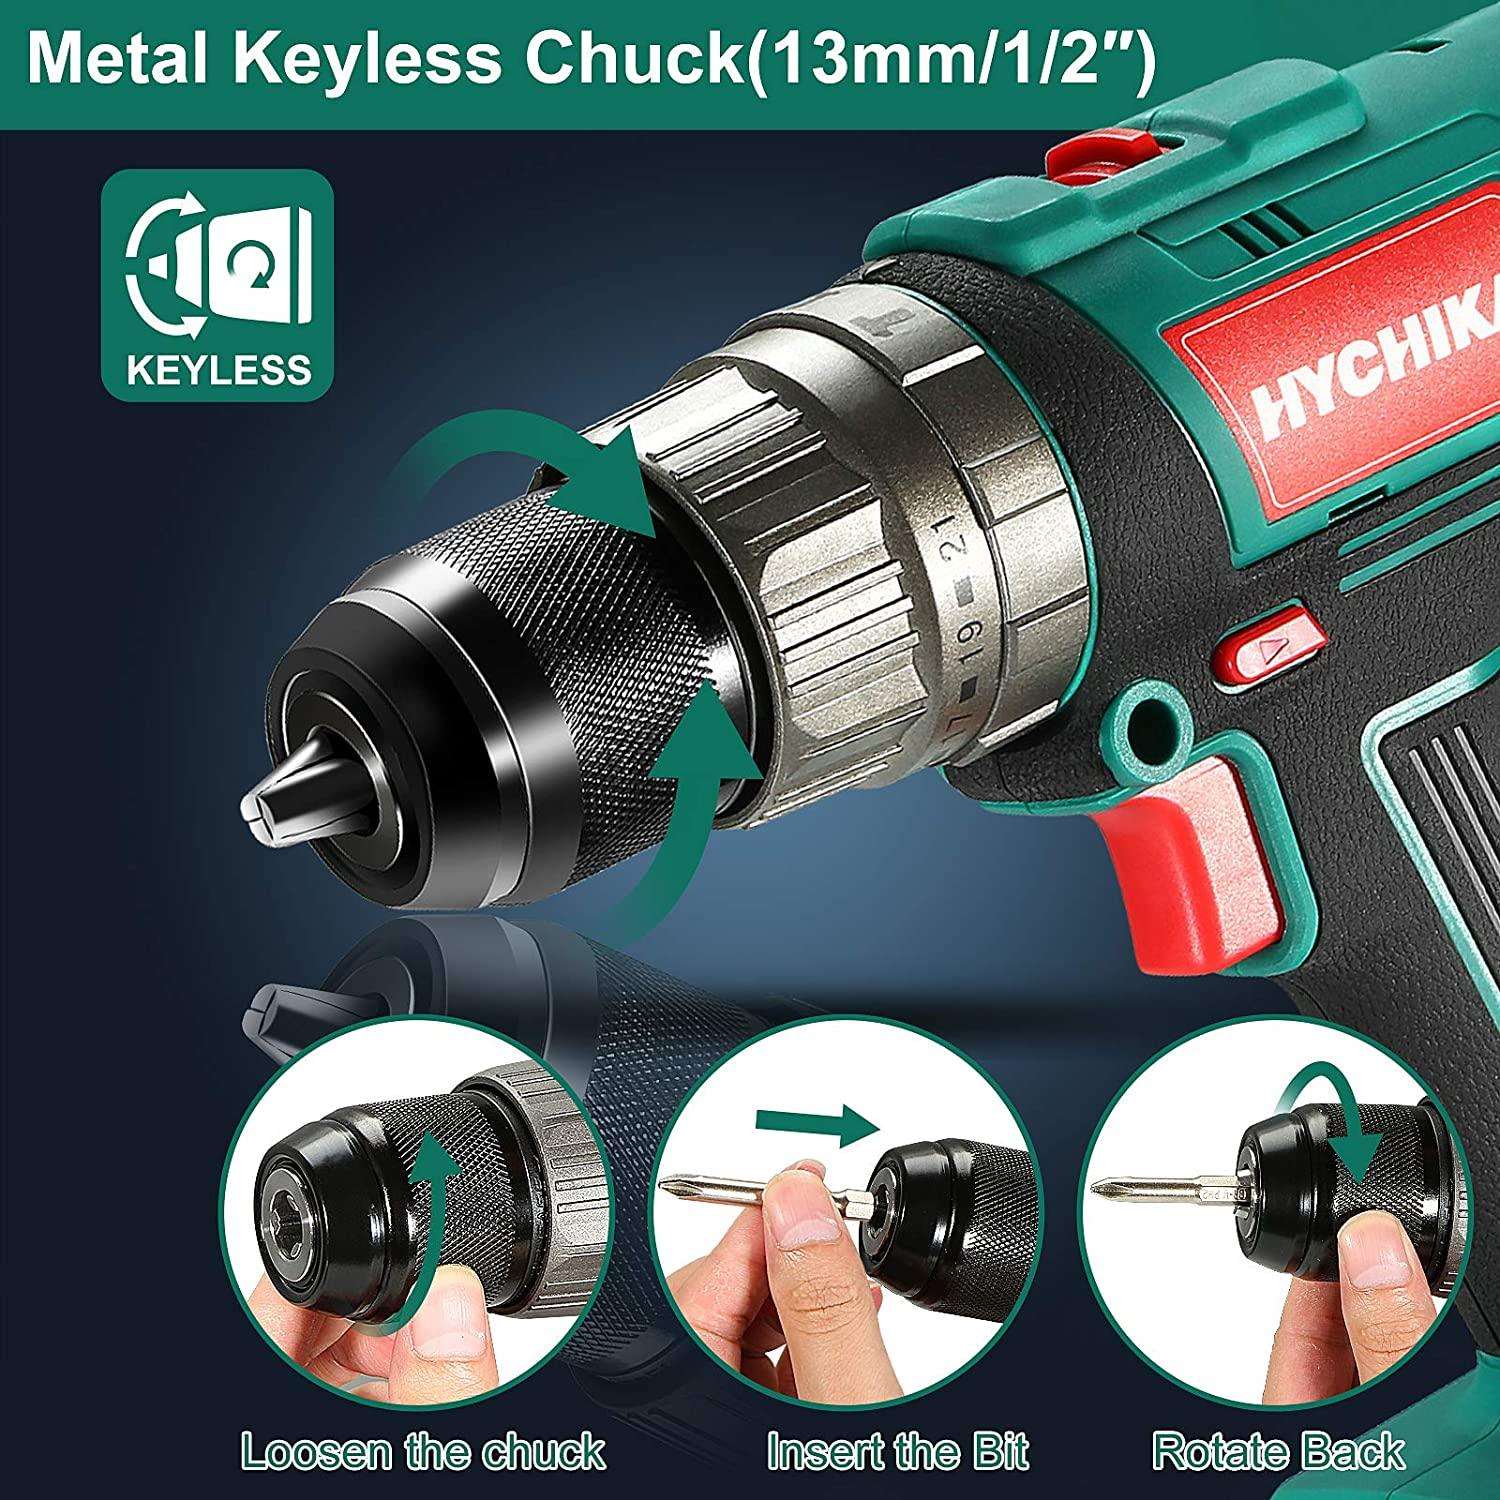 HYCHIKA 12V Double-Battery Cordless Electric Drill Electric Screwdriver  Wireless Power Driver DC Lithium-Ion Battery Drill 201225